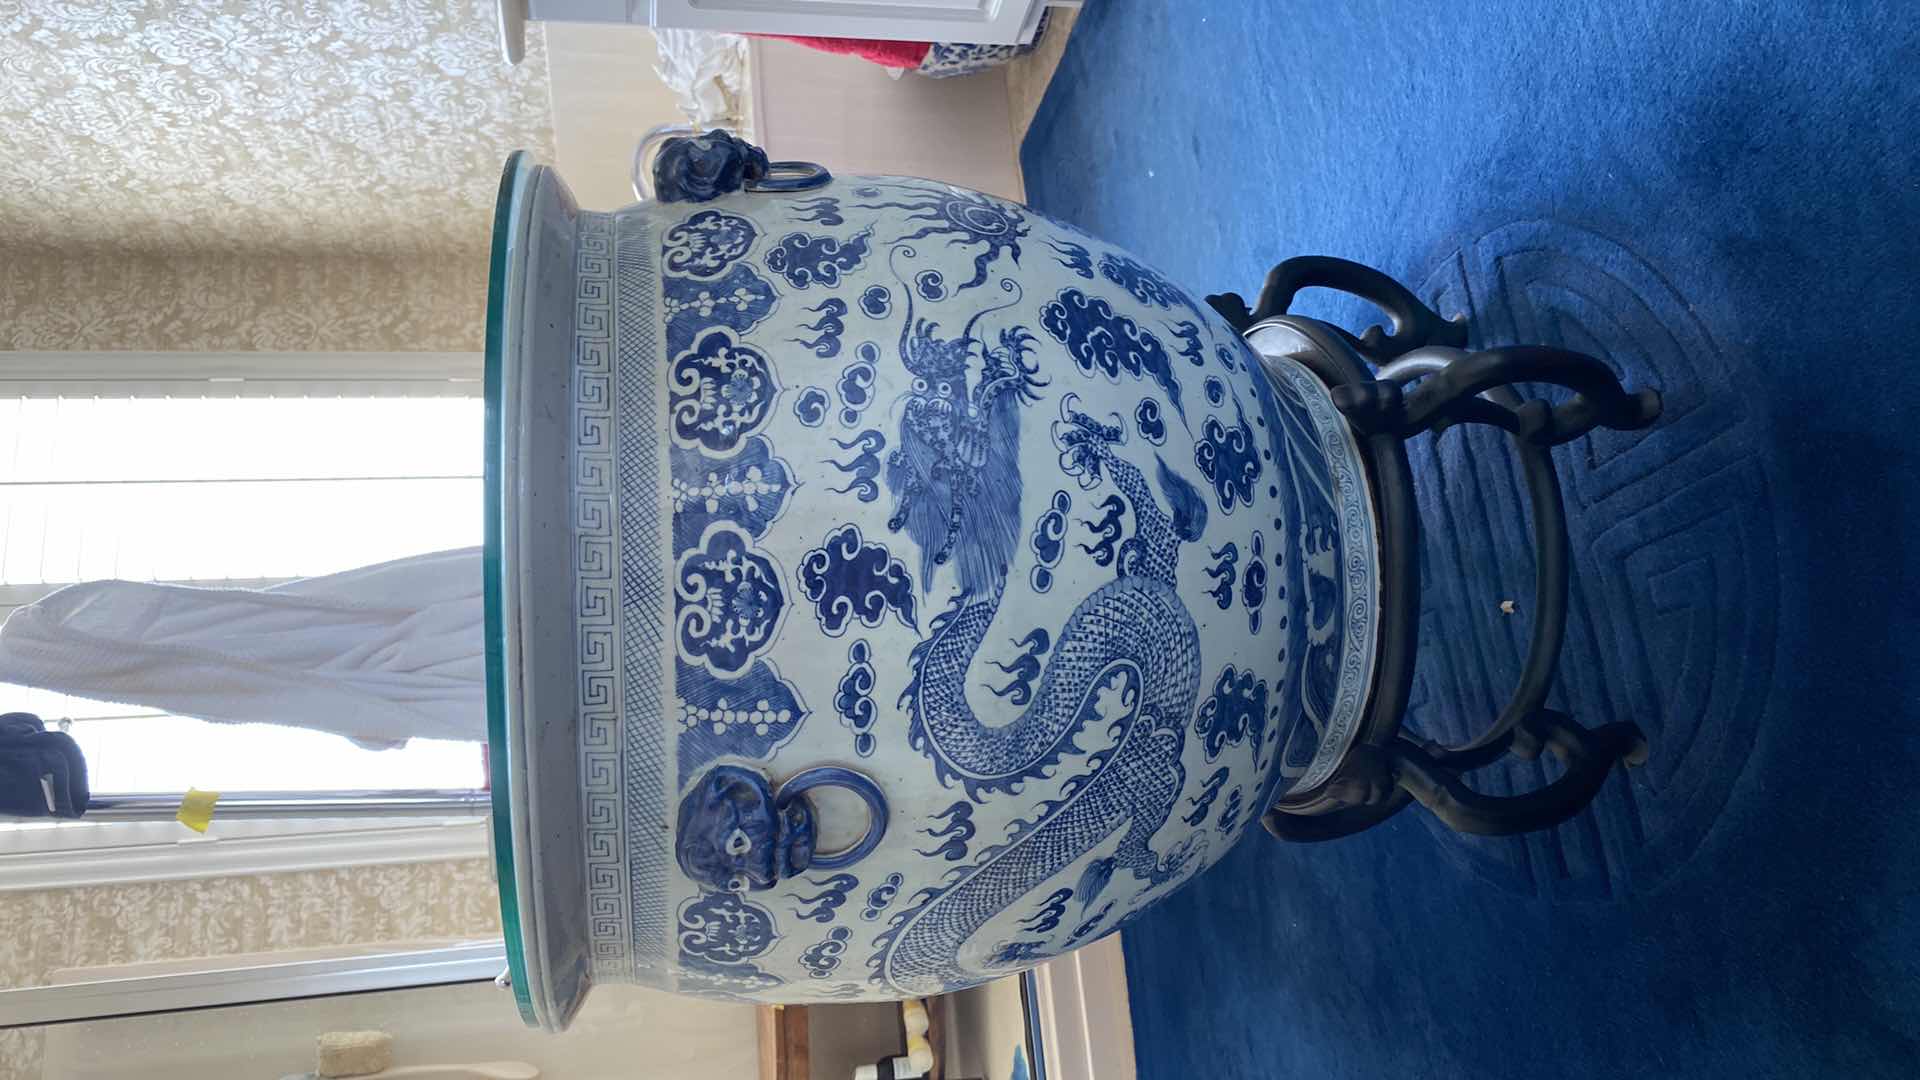 Photo 5 of LARGE PORCELAIN IMPERIAL BLUE DRAGON FISHBOWL PLANTER ON STAND, MEASURING 
24“ x 22“ without stand, GLASSTOP INCLUDED 